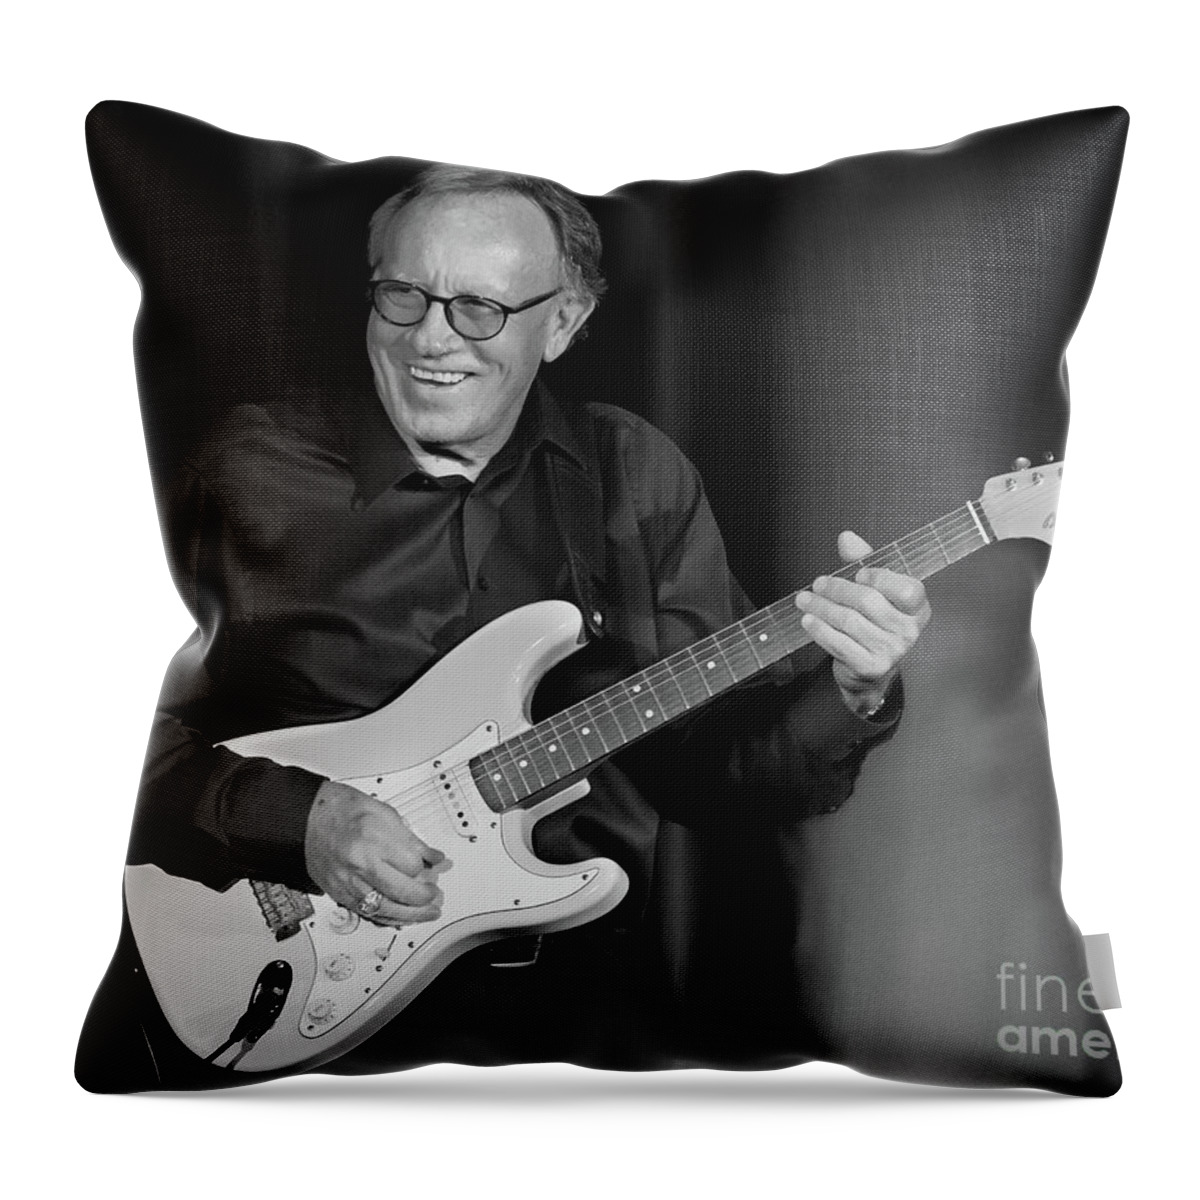 Guitar Player Throw Pillow featuring the photograph Mike Smile by Kim Yarbrough